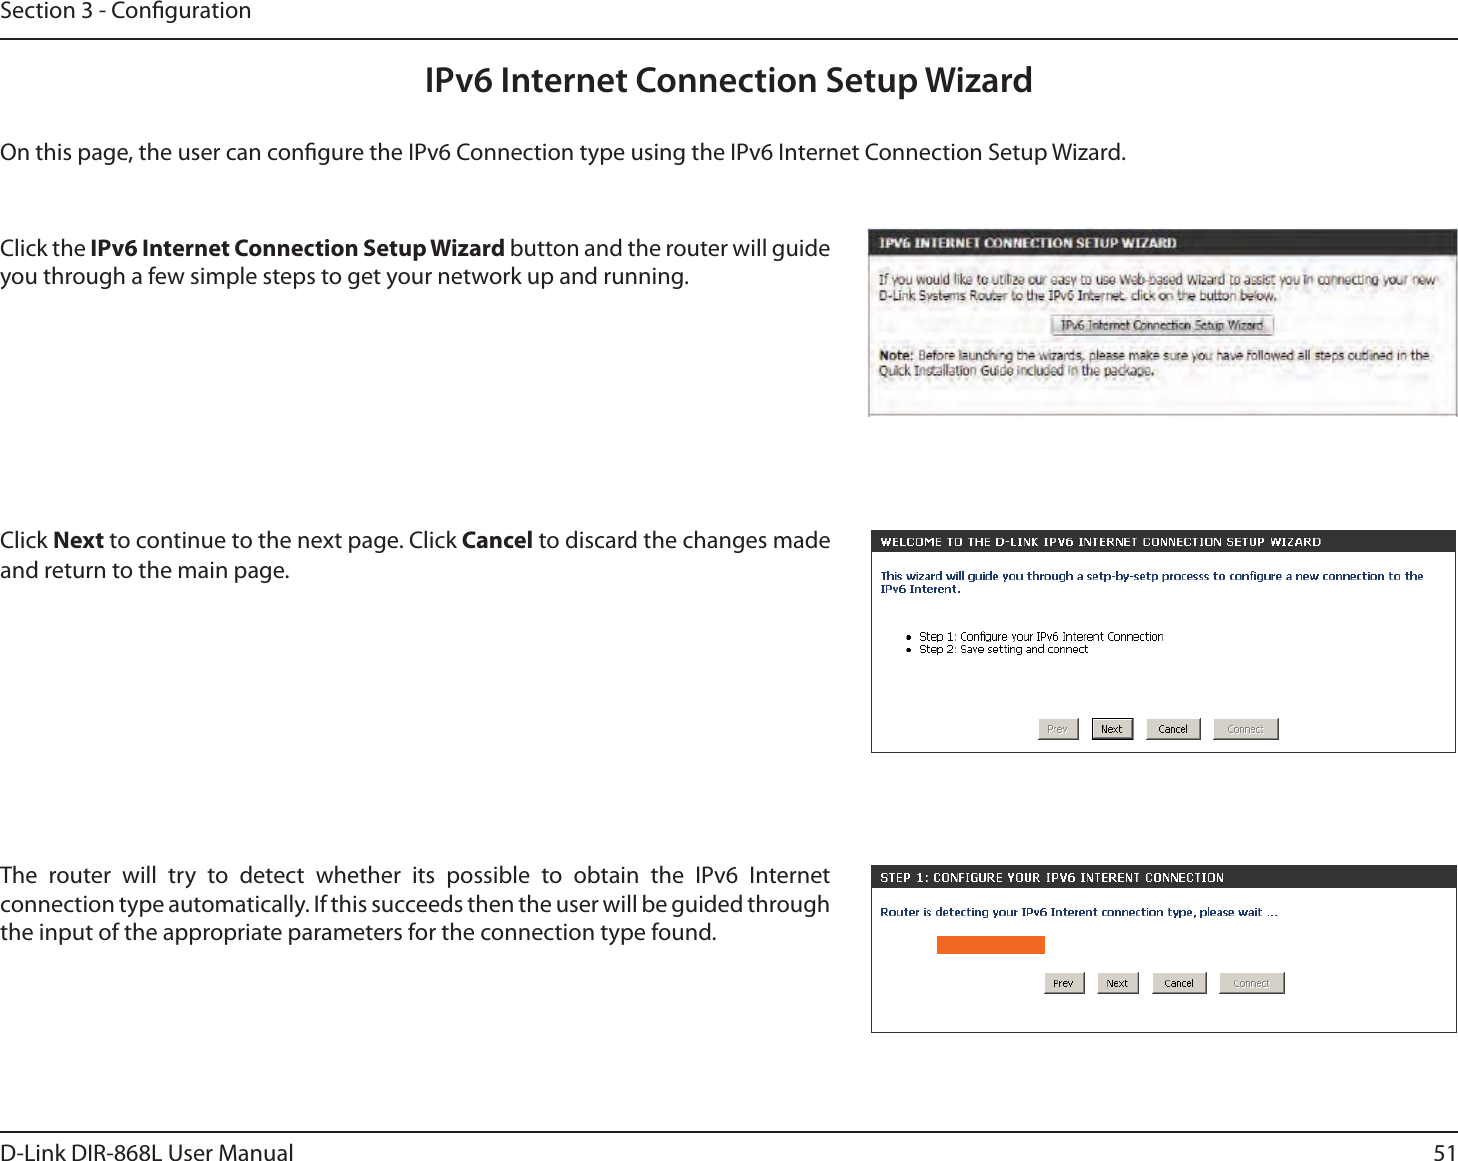 51D-Link DIR-868L User ManualSection 3 - CongurationIPv6 Internet Connection Setup WizardOn this page, the user can congure the IPv6 Connection type using the IPv6 Internet Connection Setup Wizard.Click the IPv6 Internet Connection Setup Wizard button and the router will guide you through a few simple steps to get your network up and running.Click Next to continue to the next page. Click Cancel to discard the changes made and return to the main page.The router will try to detect whether its possible to obtain the IPv6 Internet connection type automatically. If this succeeds then the user will be guided through the input of the appropriate parameters for the connection type found.